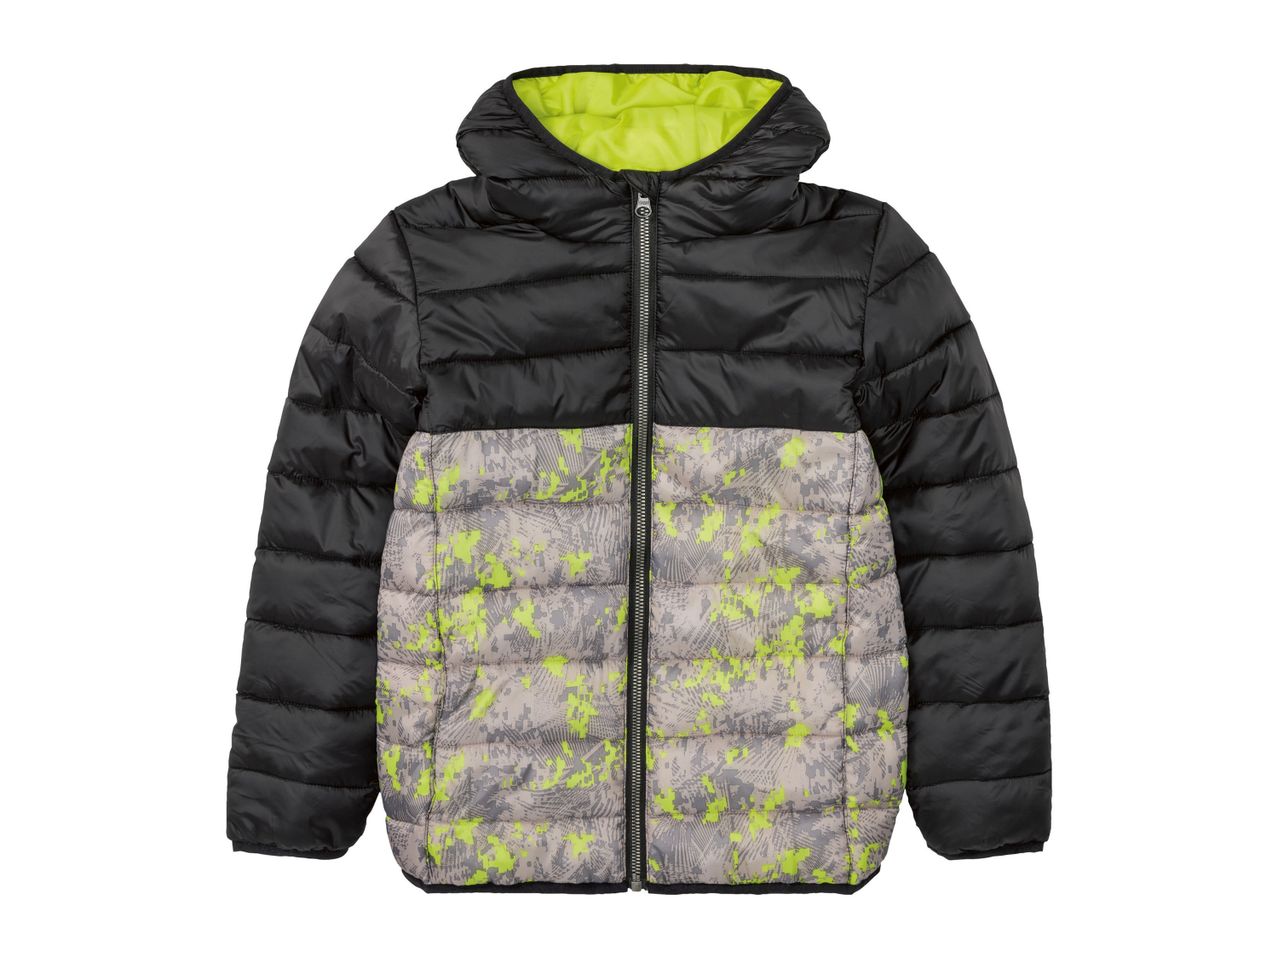 Go to full screen view: Boy’s Lightweight Jacket - Image 3